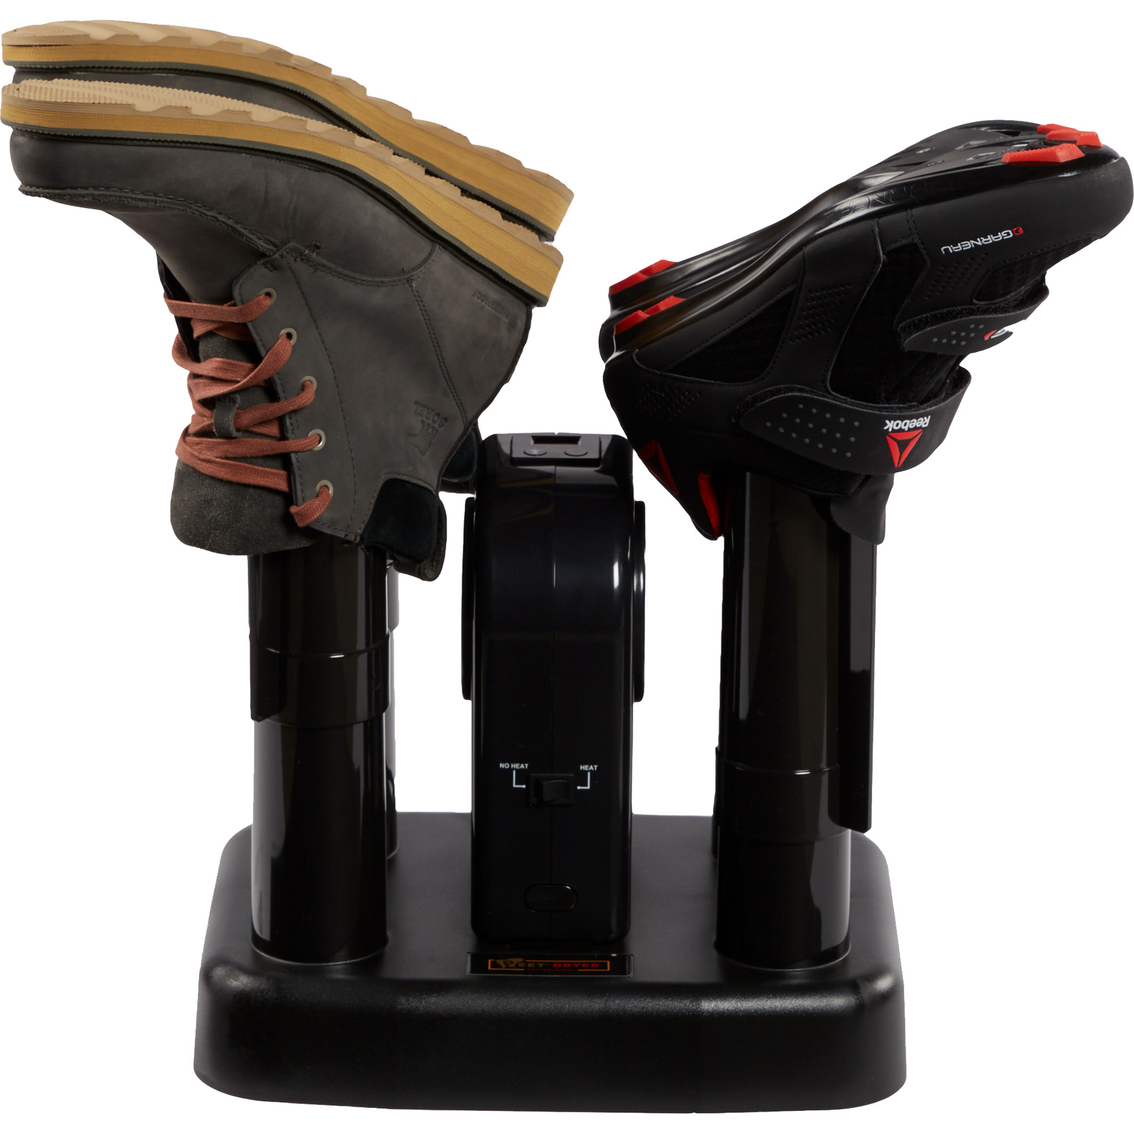 Peet Advantage Heated Shoe and Boot Dryer - Image 5 of 5